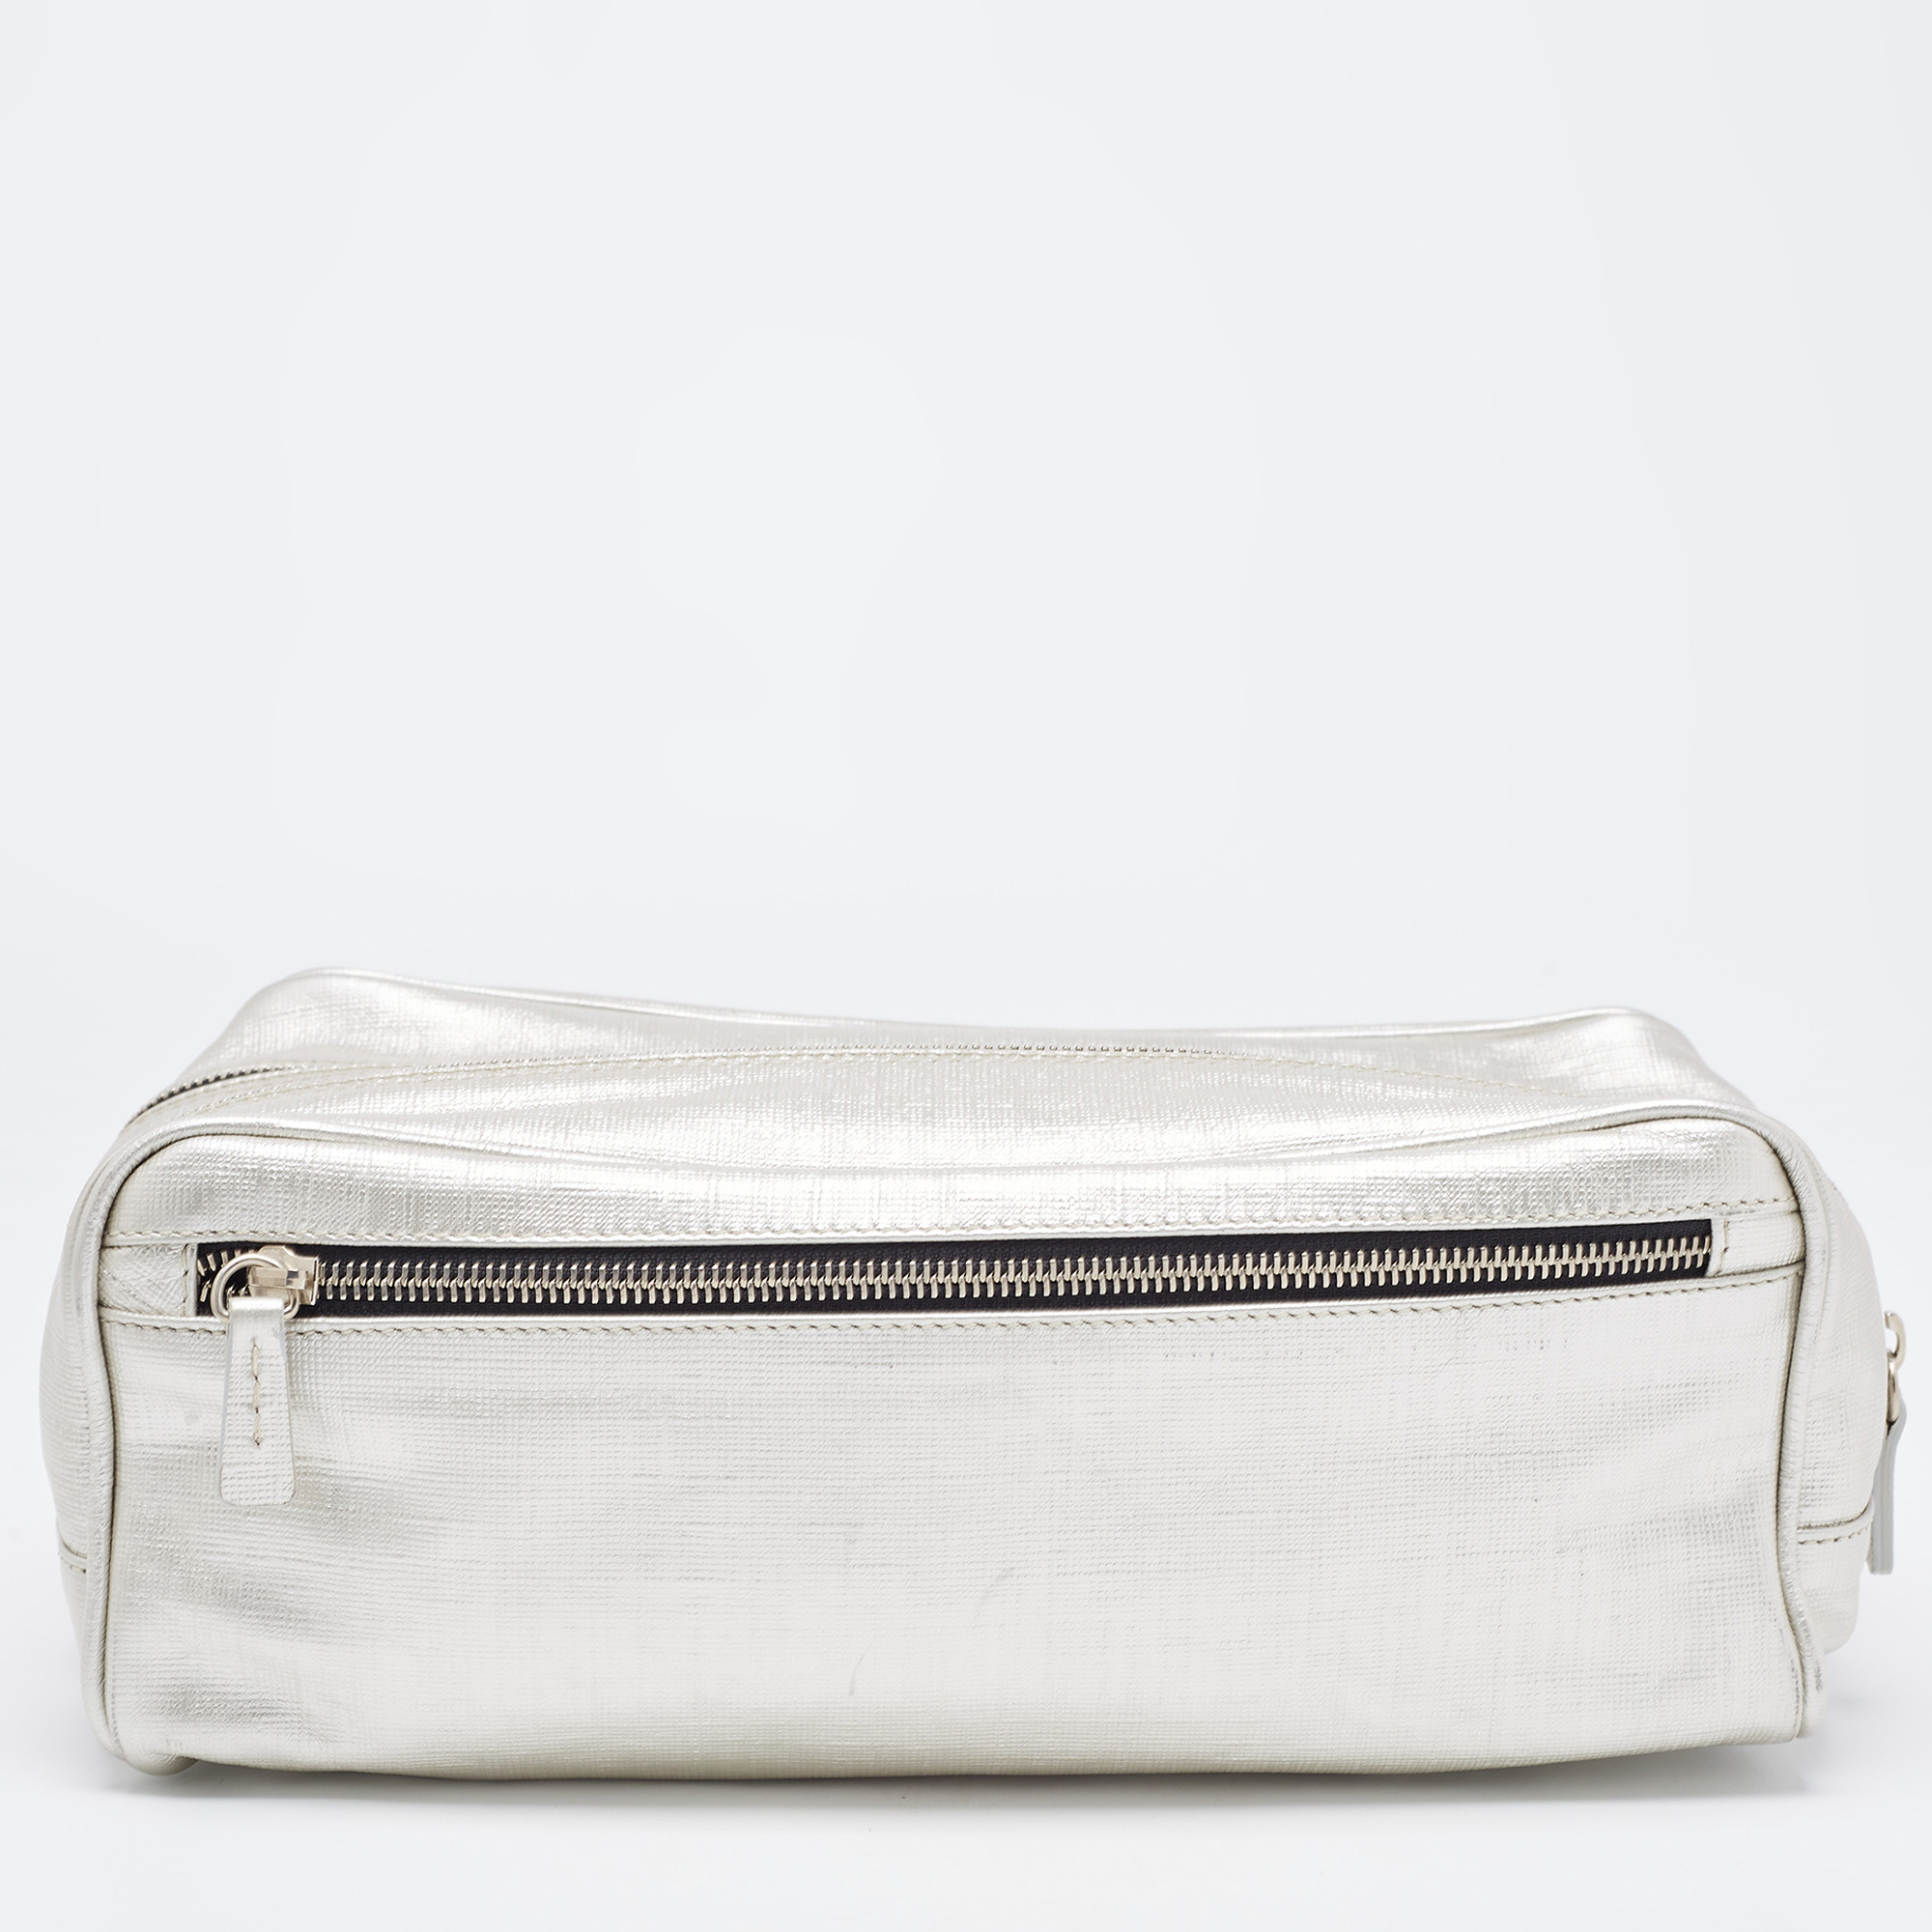 Gianfranco Ferre Silver Leather Oversized Pouch